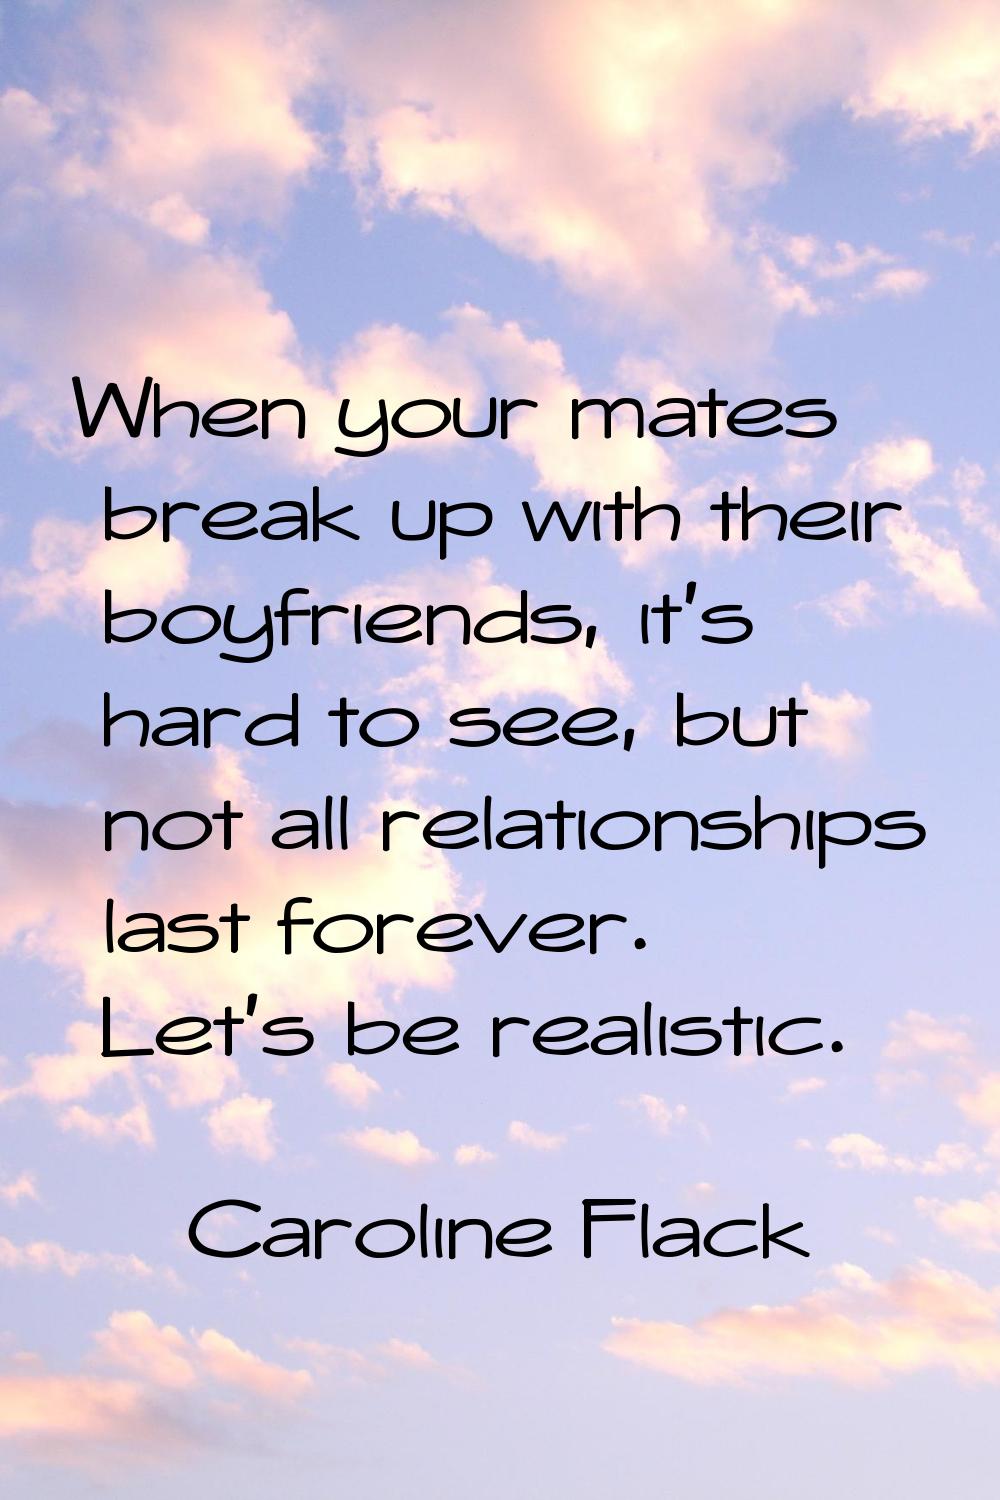 When your mates break up with their boyfriends, it's hard to see, but not all relationships last fo